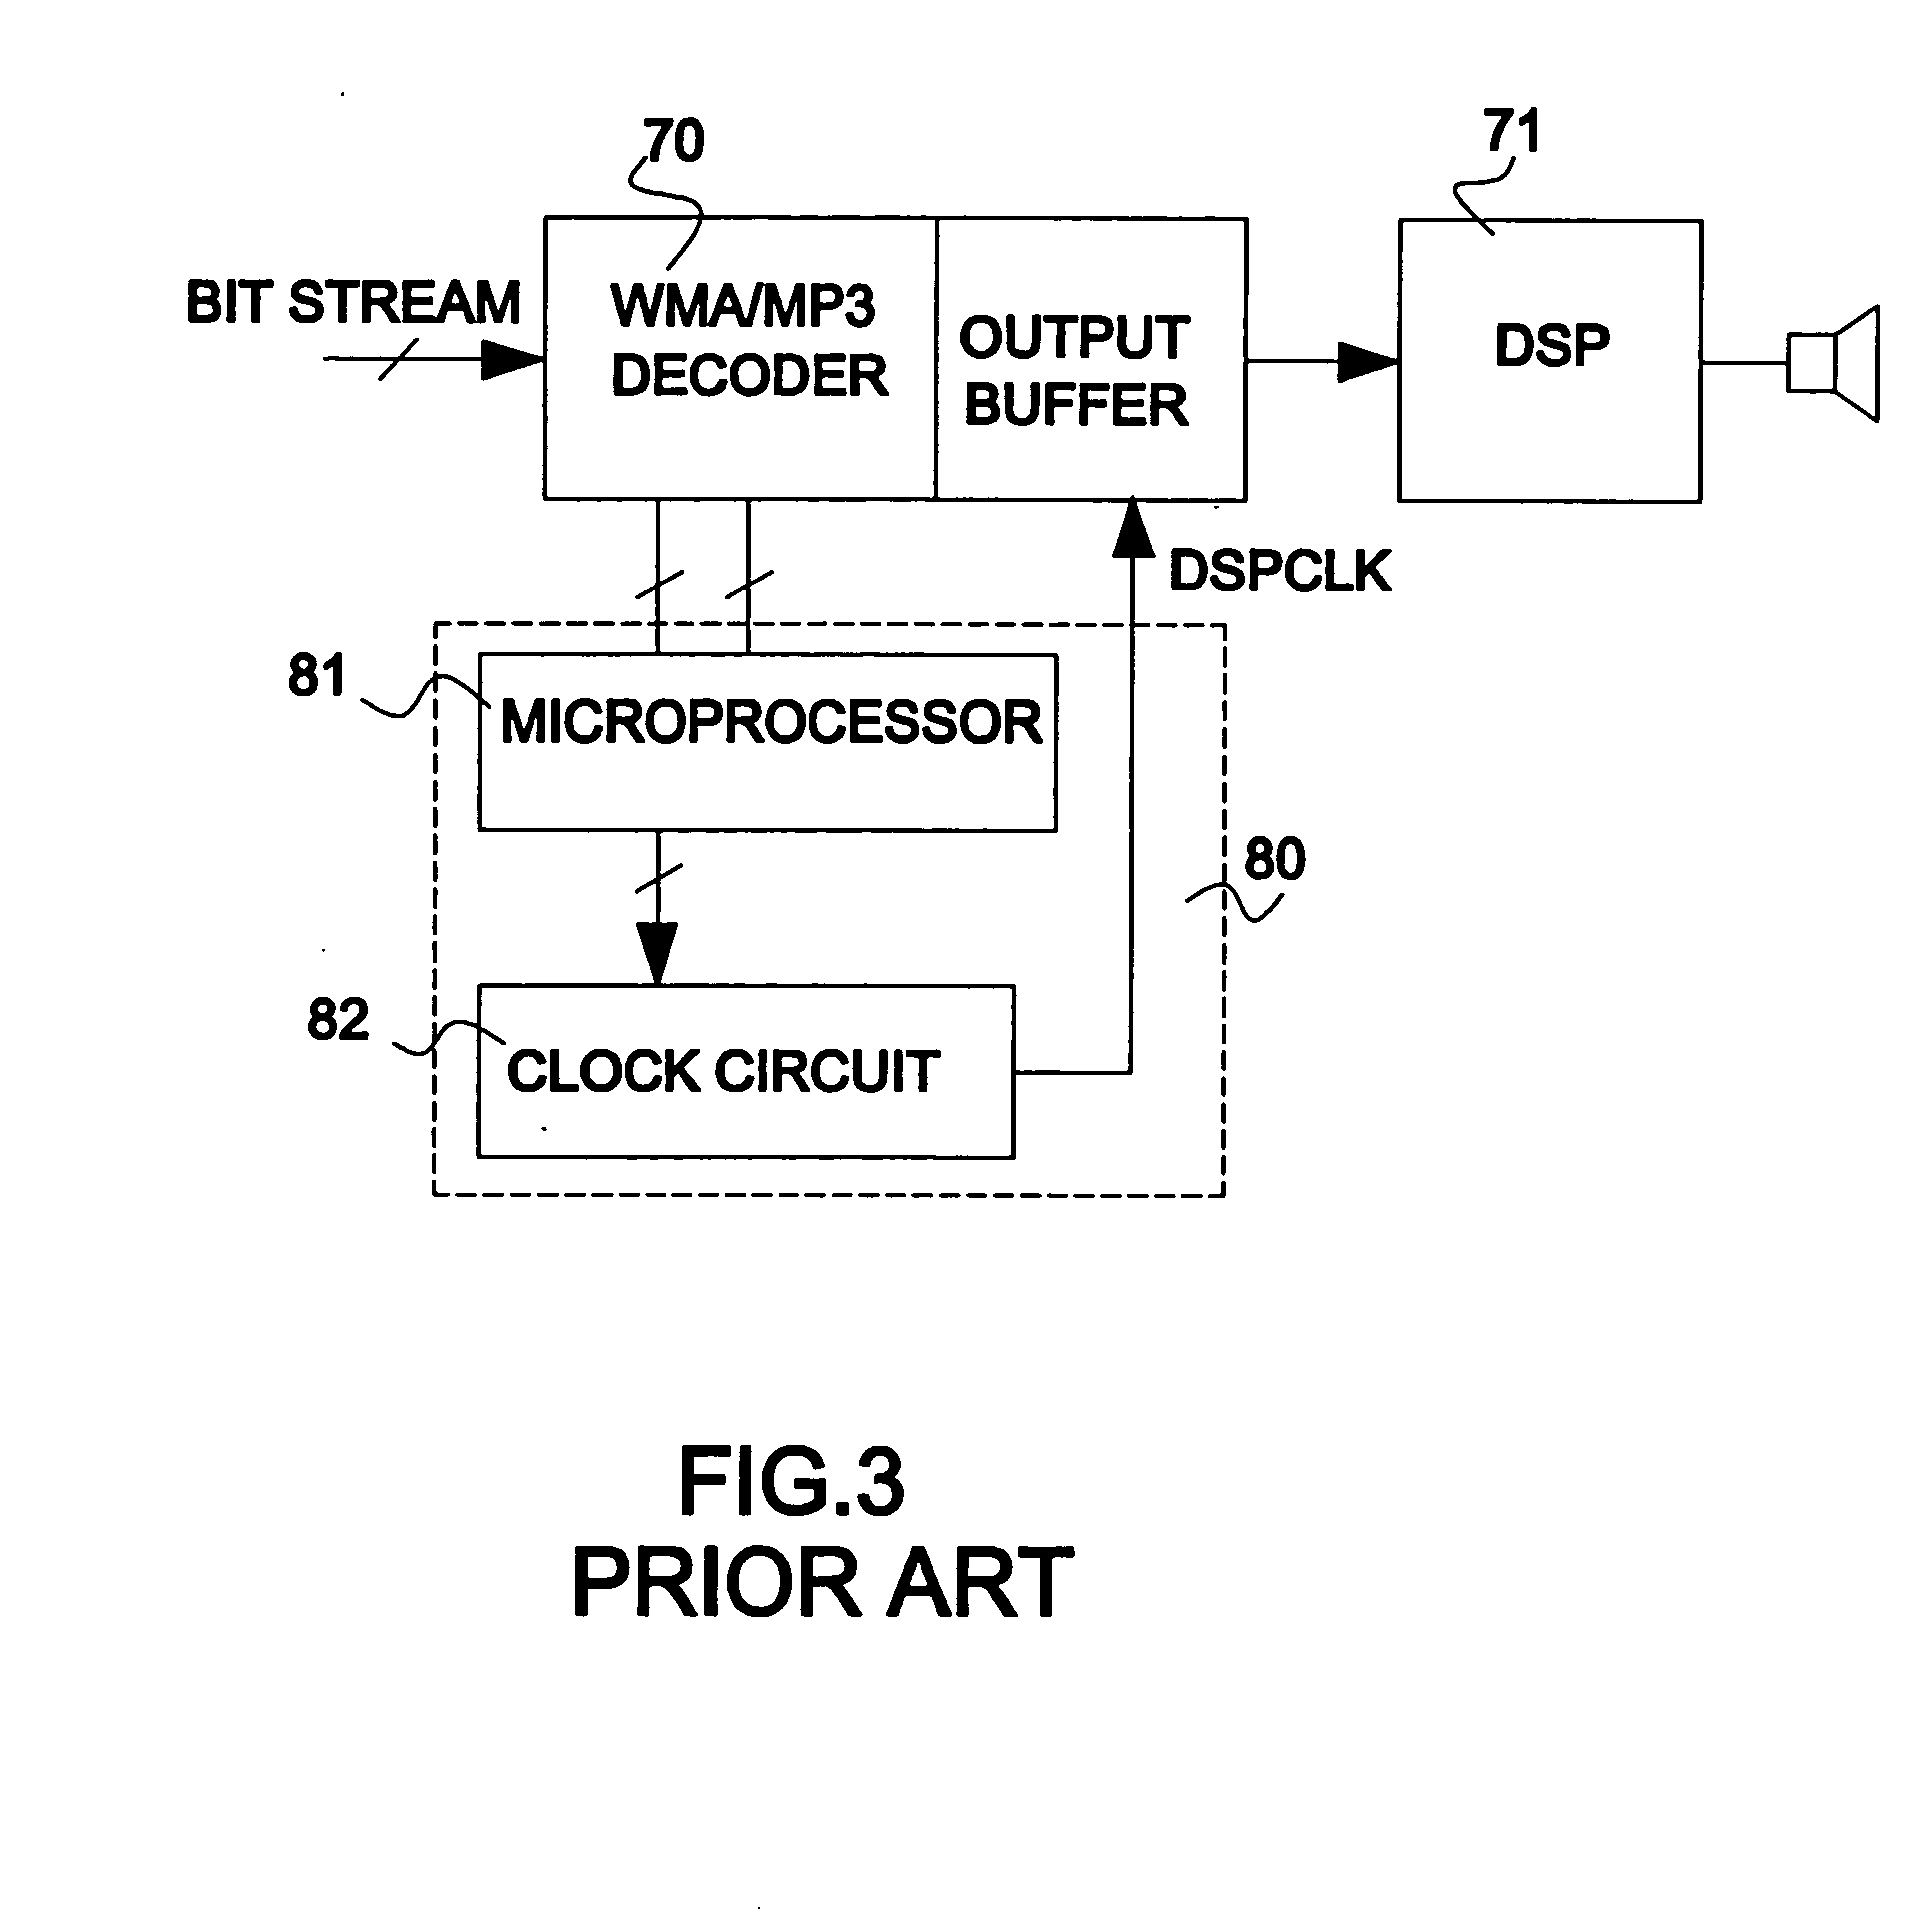 Variable frequency decoding apparatus for efficient power management in a portable audio device